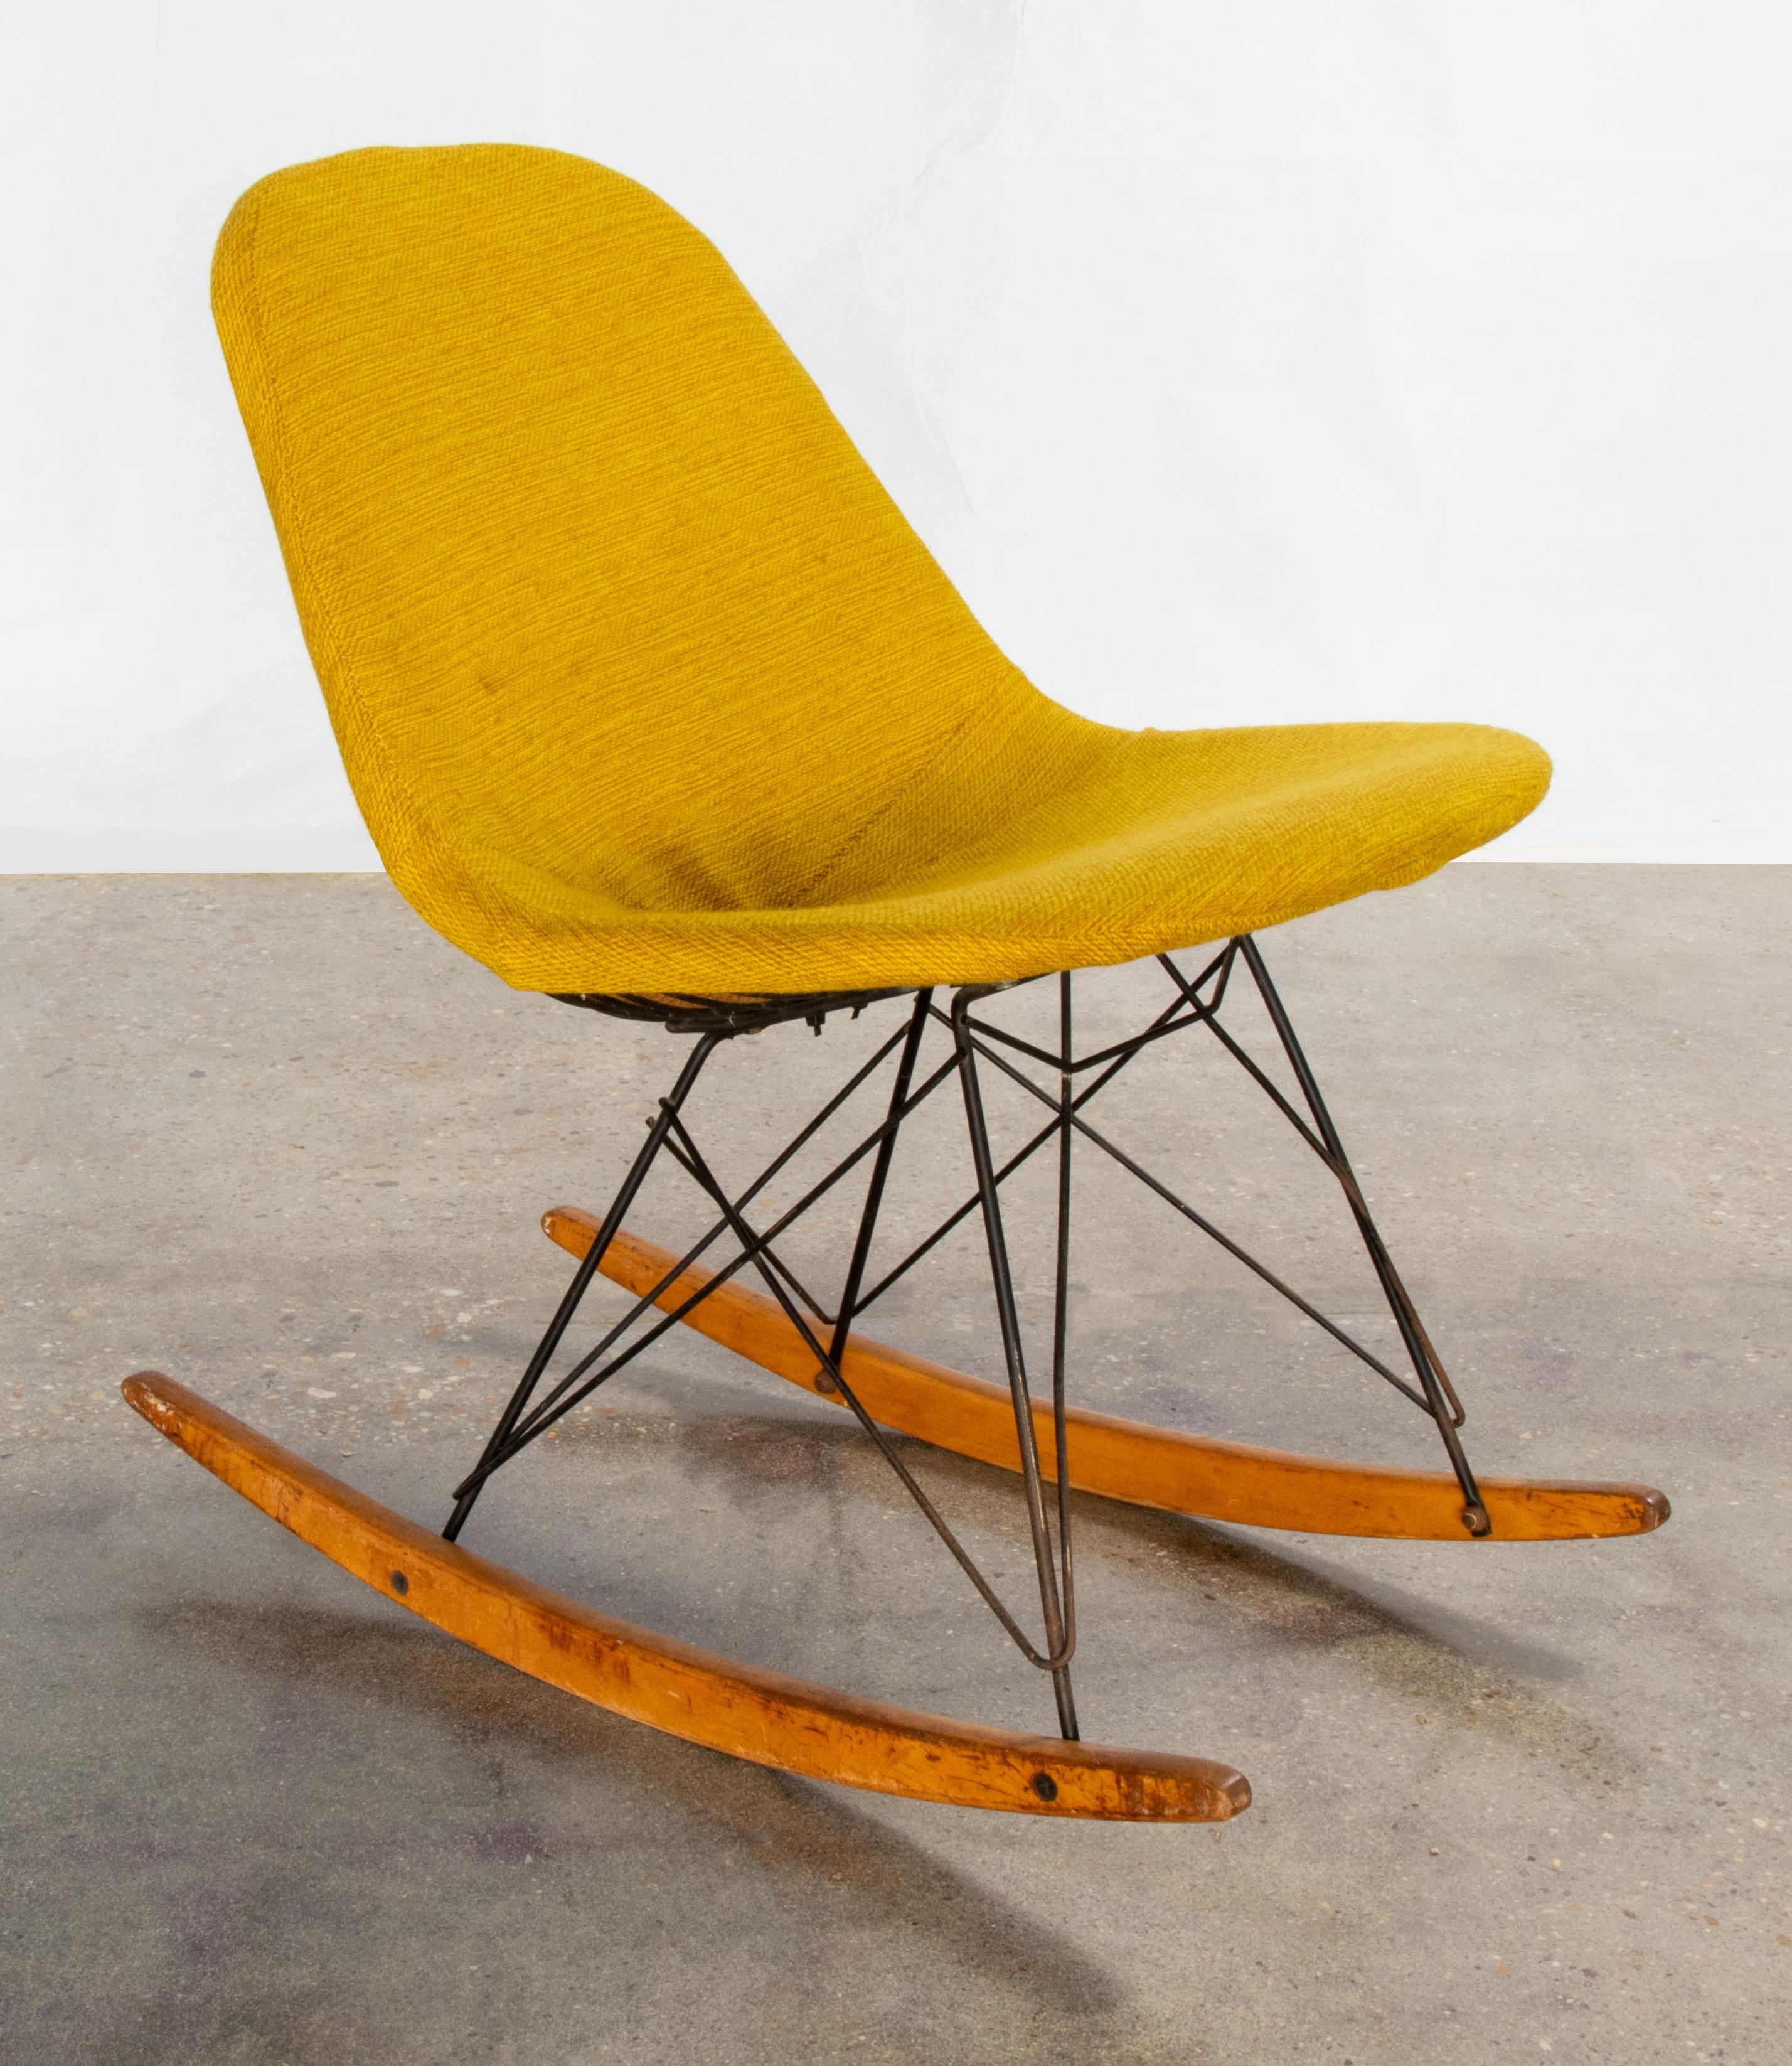 Mid-Century Modern 1950s Eames RKR Rocking Wire Side Chair with Yellow Hopsak original cover. For Sale